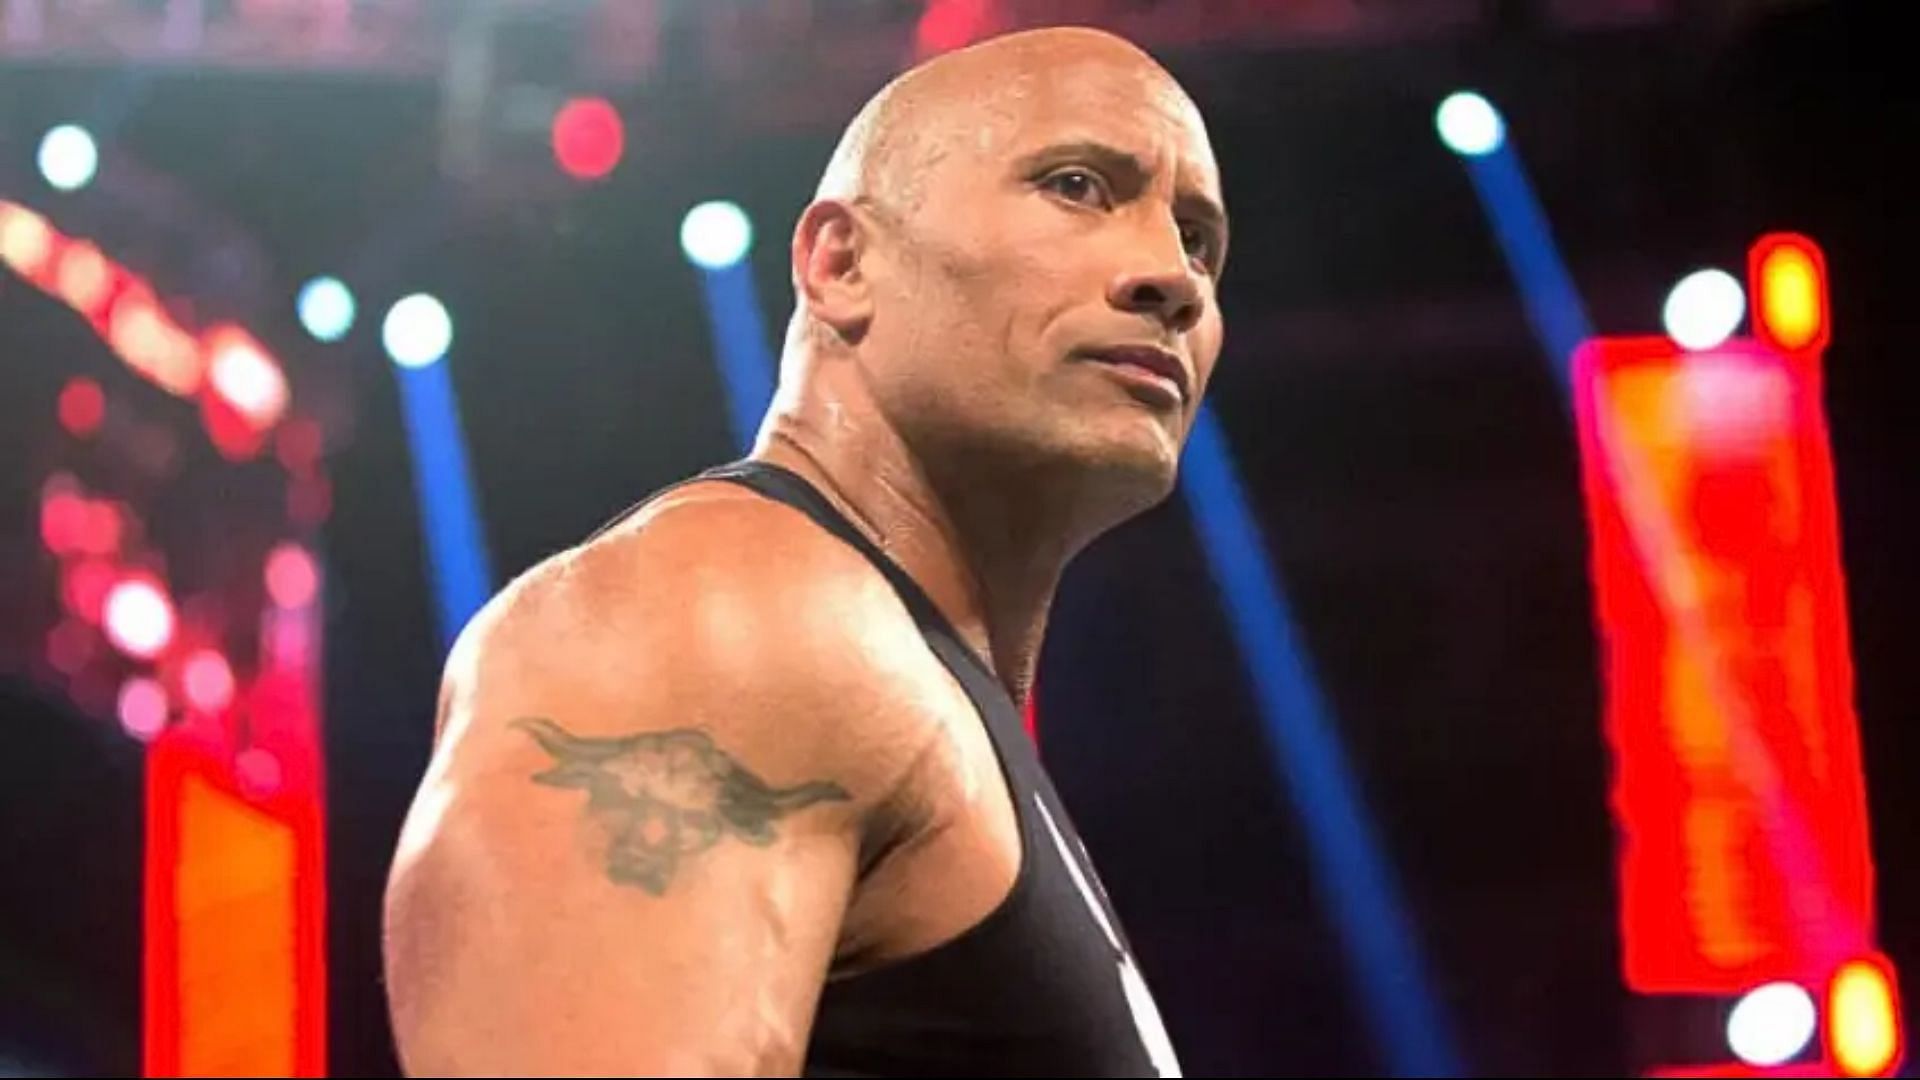 The Rock retired from in-ring competition in 2019